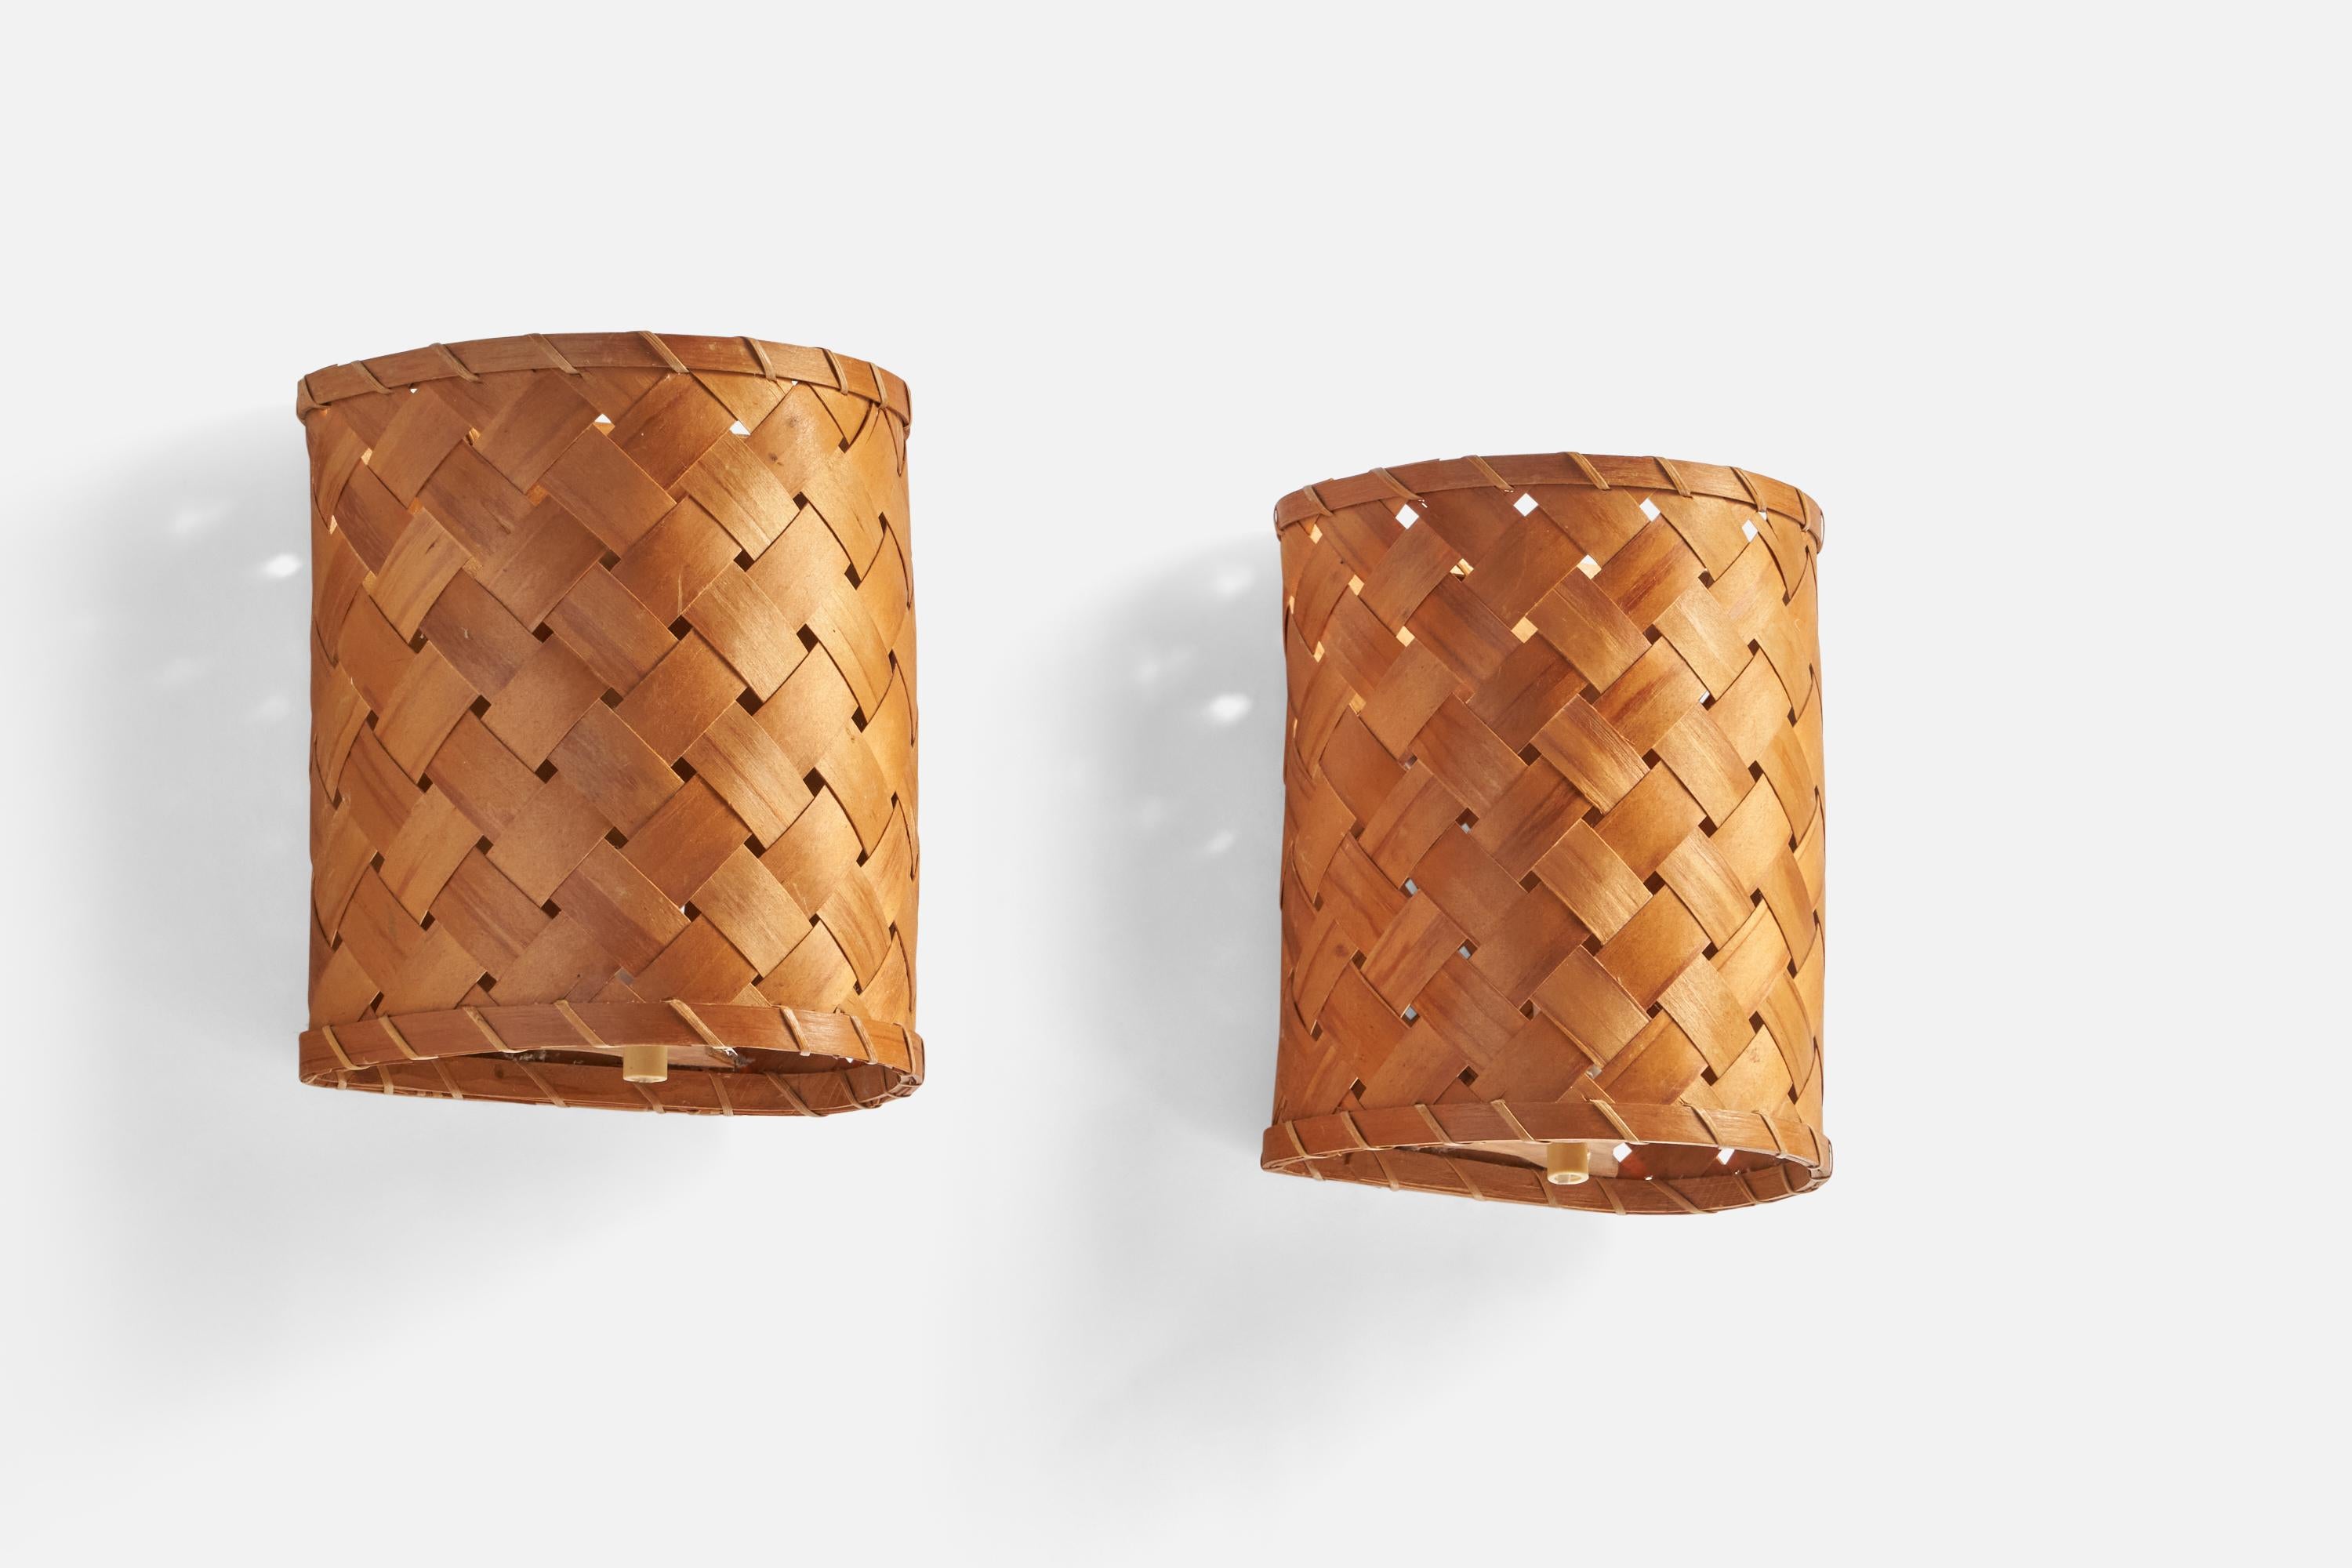 A pair of braided pine veneer wall lights designed and produced in Sweden, c. 1960s.

Overall Dimensions (inches): 8.75” H x 7.5” W x 6” D
Back Plate Dimensions (inches): N/A
Bulb Specifications: E-14 Bulbs
Number of Sockets: 2
All lighting will be